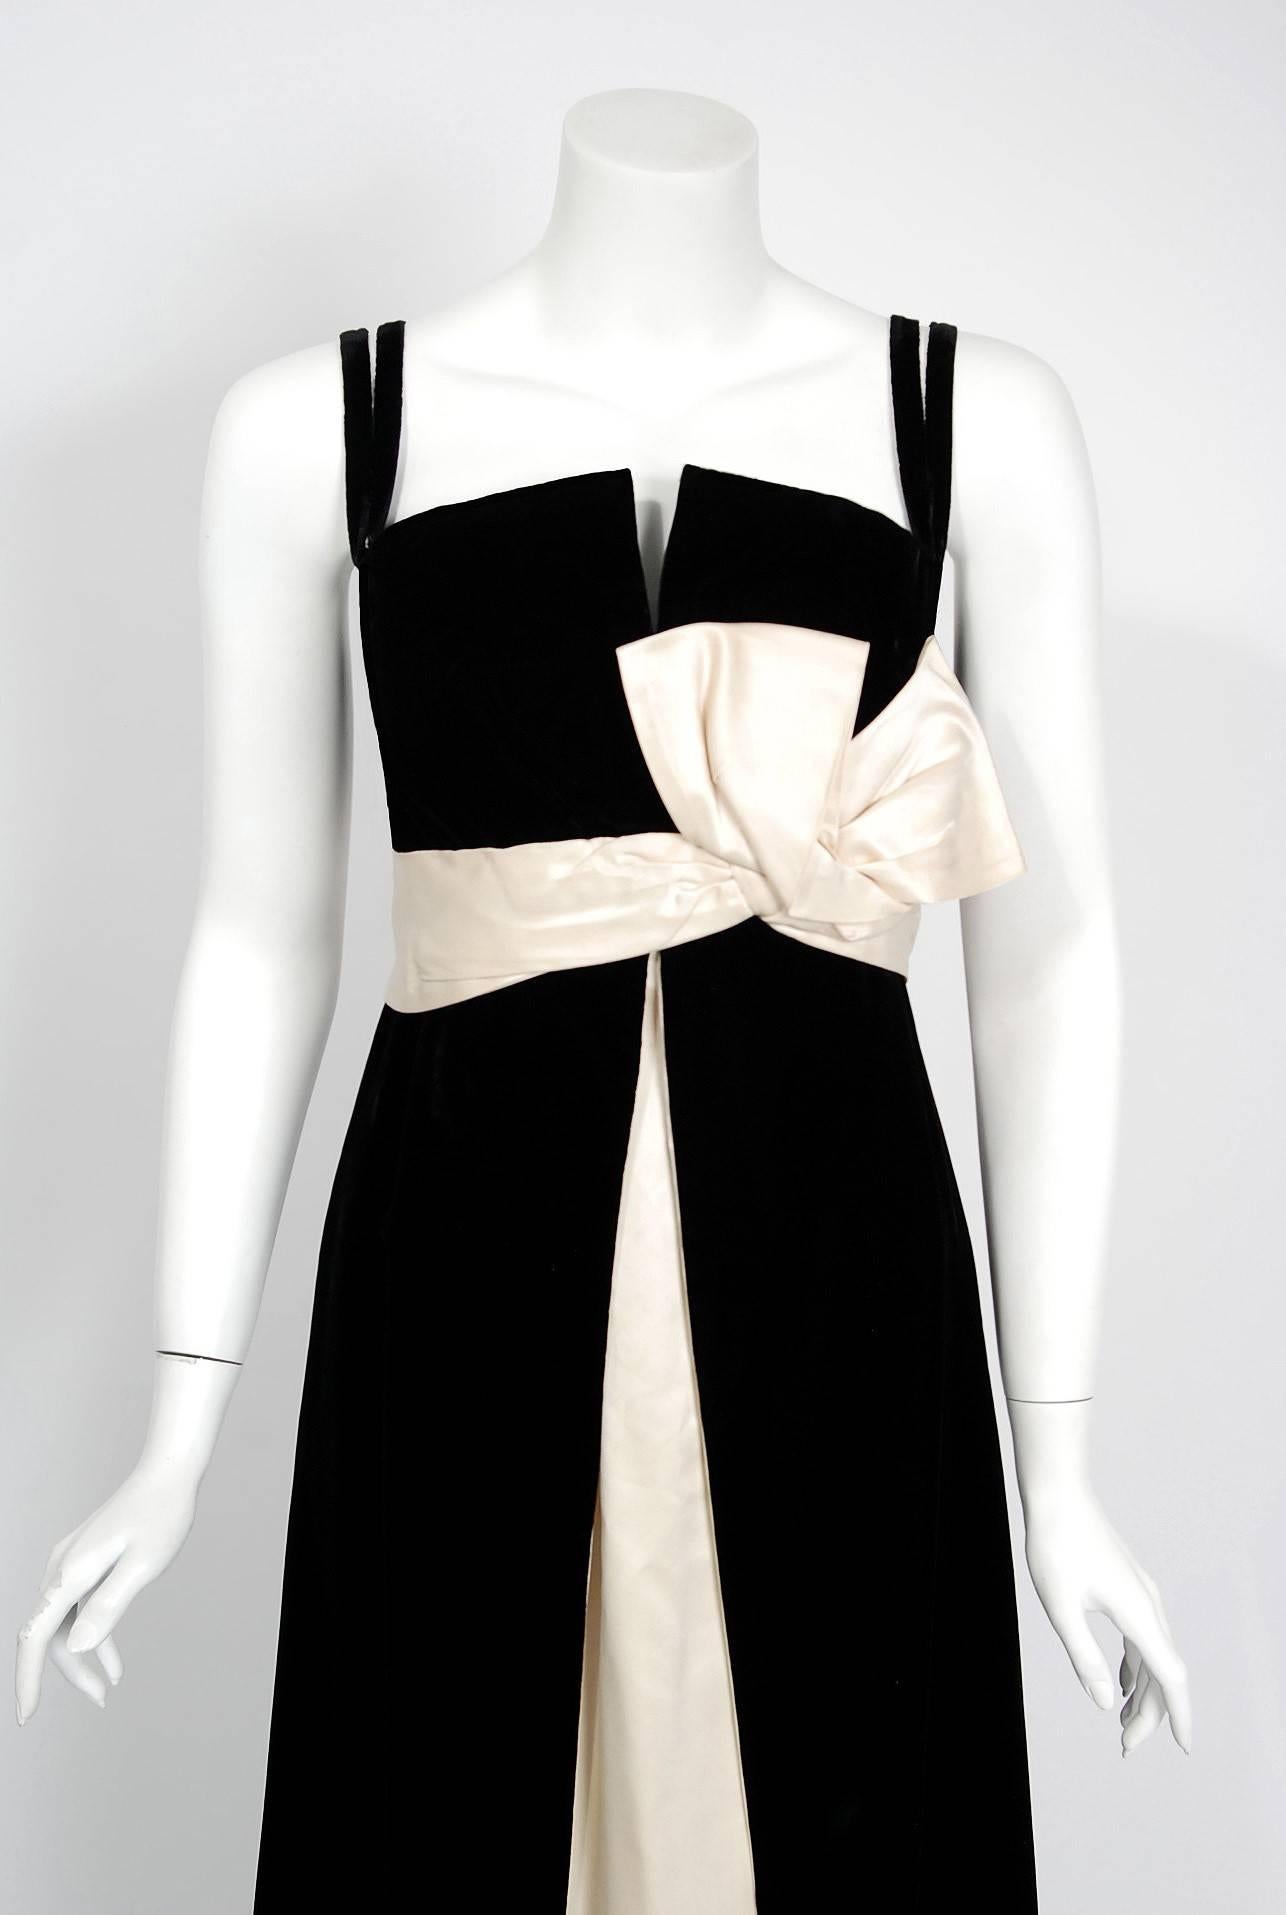 Breathtaking Philip Hulitar couture black velvet and ivory satin evening gown dating back to the late 1950's. Hulitar's brilliance has been known to fashion cognoscenti for years. His work is eagerly sought after by collectors who appreciate